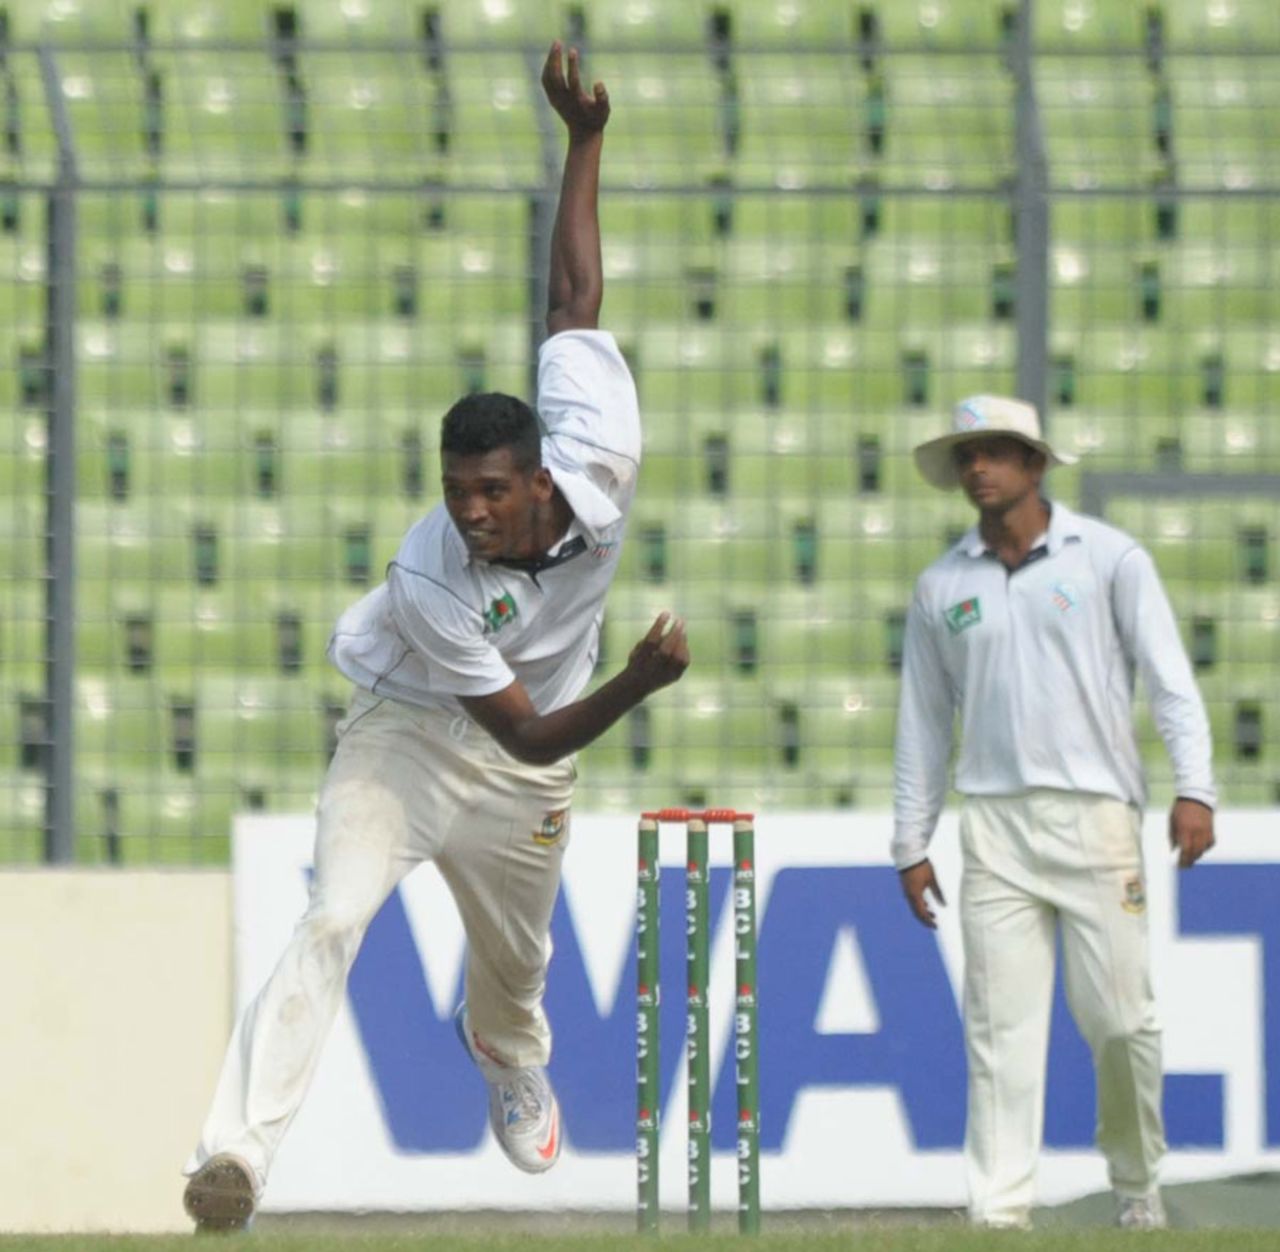 Al-Amin Hossain's four wickets gave South Zone the lead, South Zone v North Zone, Final, Bangladesh Cricket League, 2nd day, Mirpur, May 10, 2014